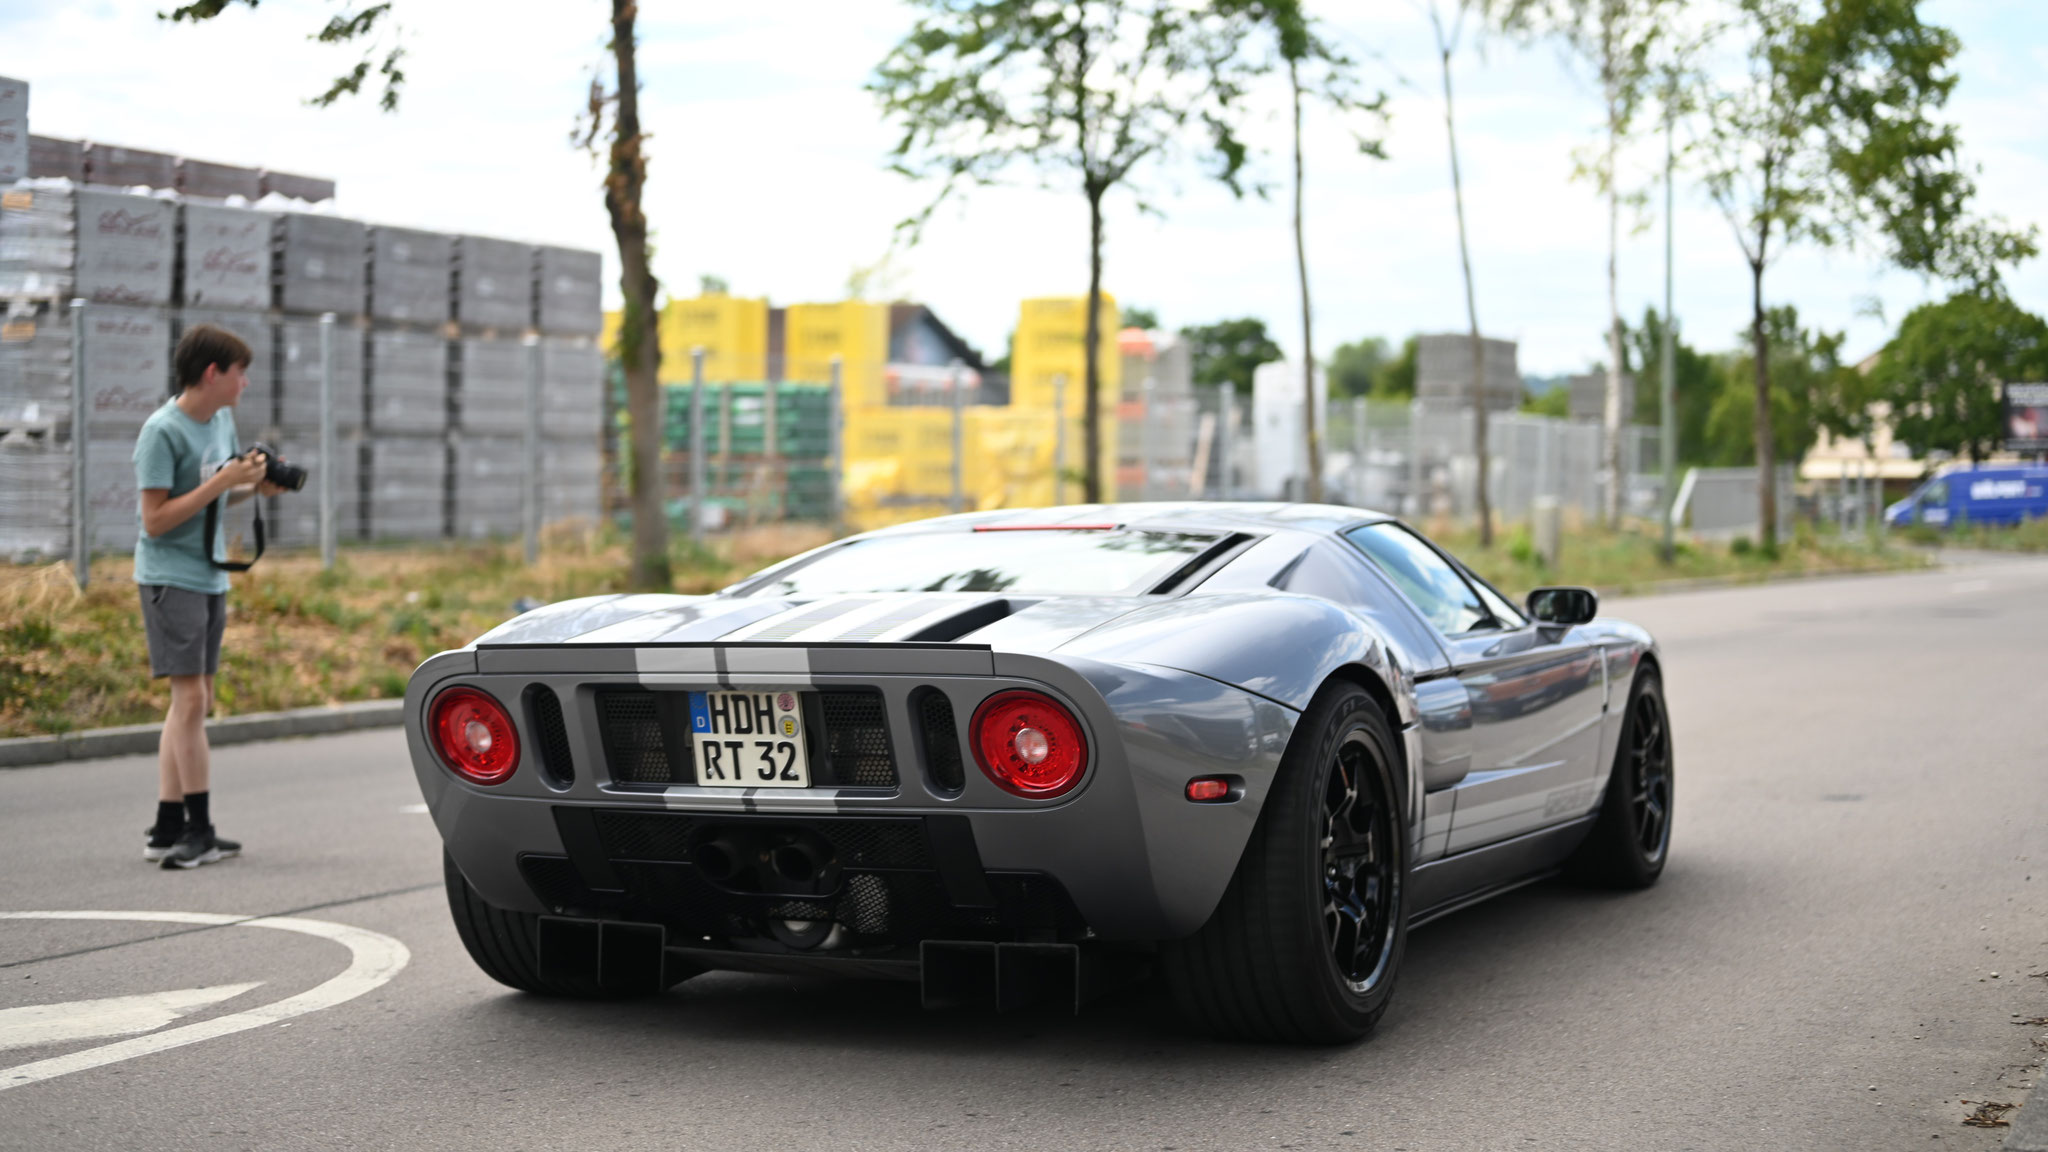 Ford GT - HDH-RT32